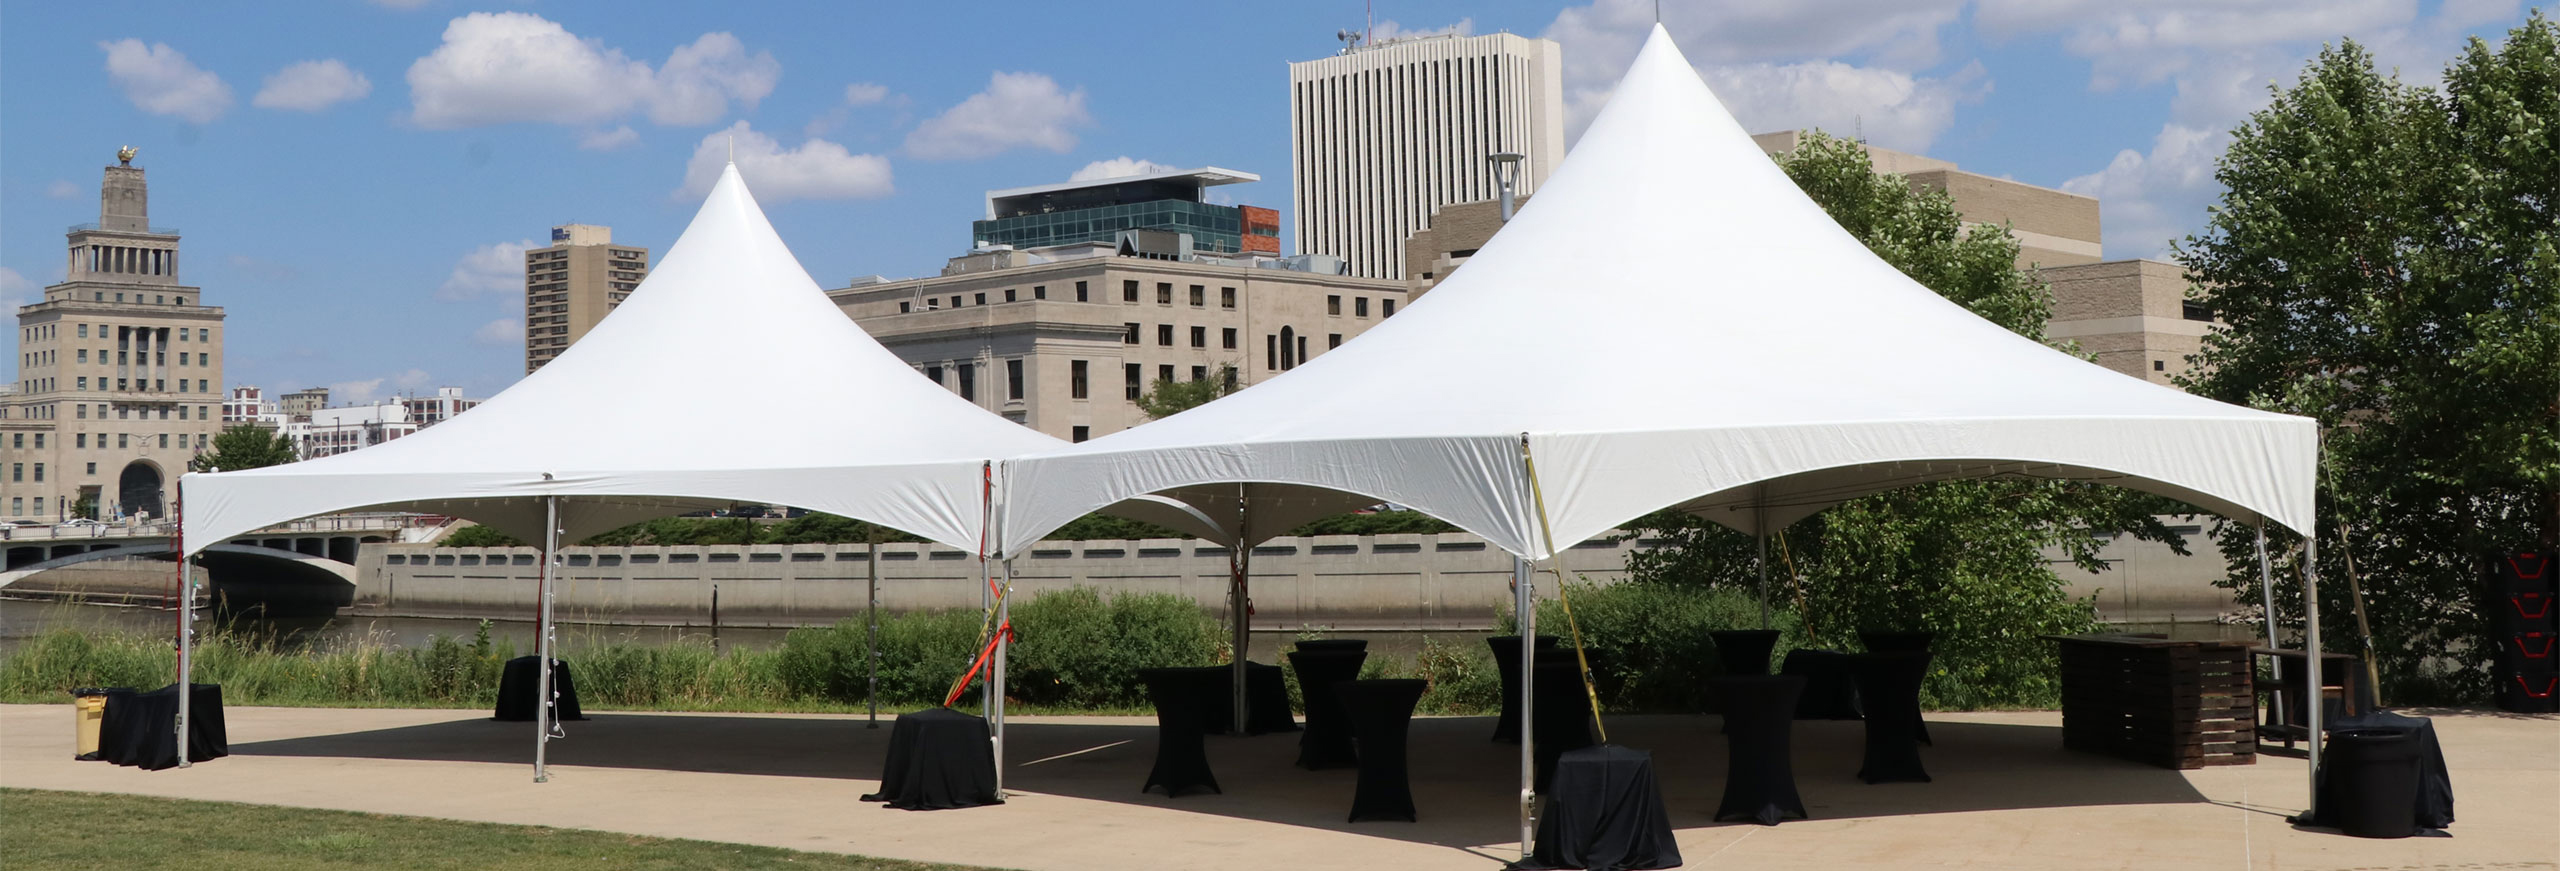 college event tents